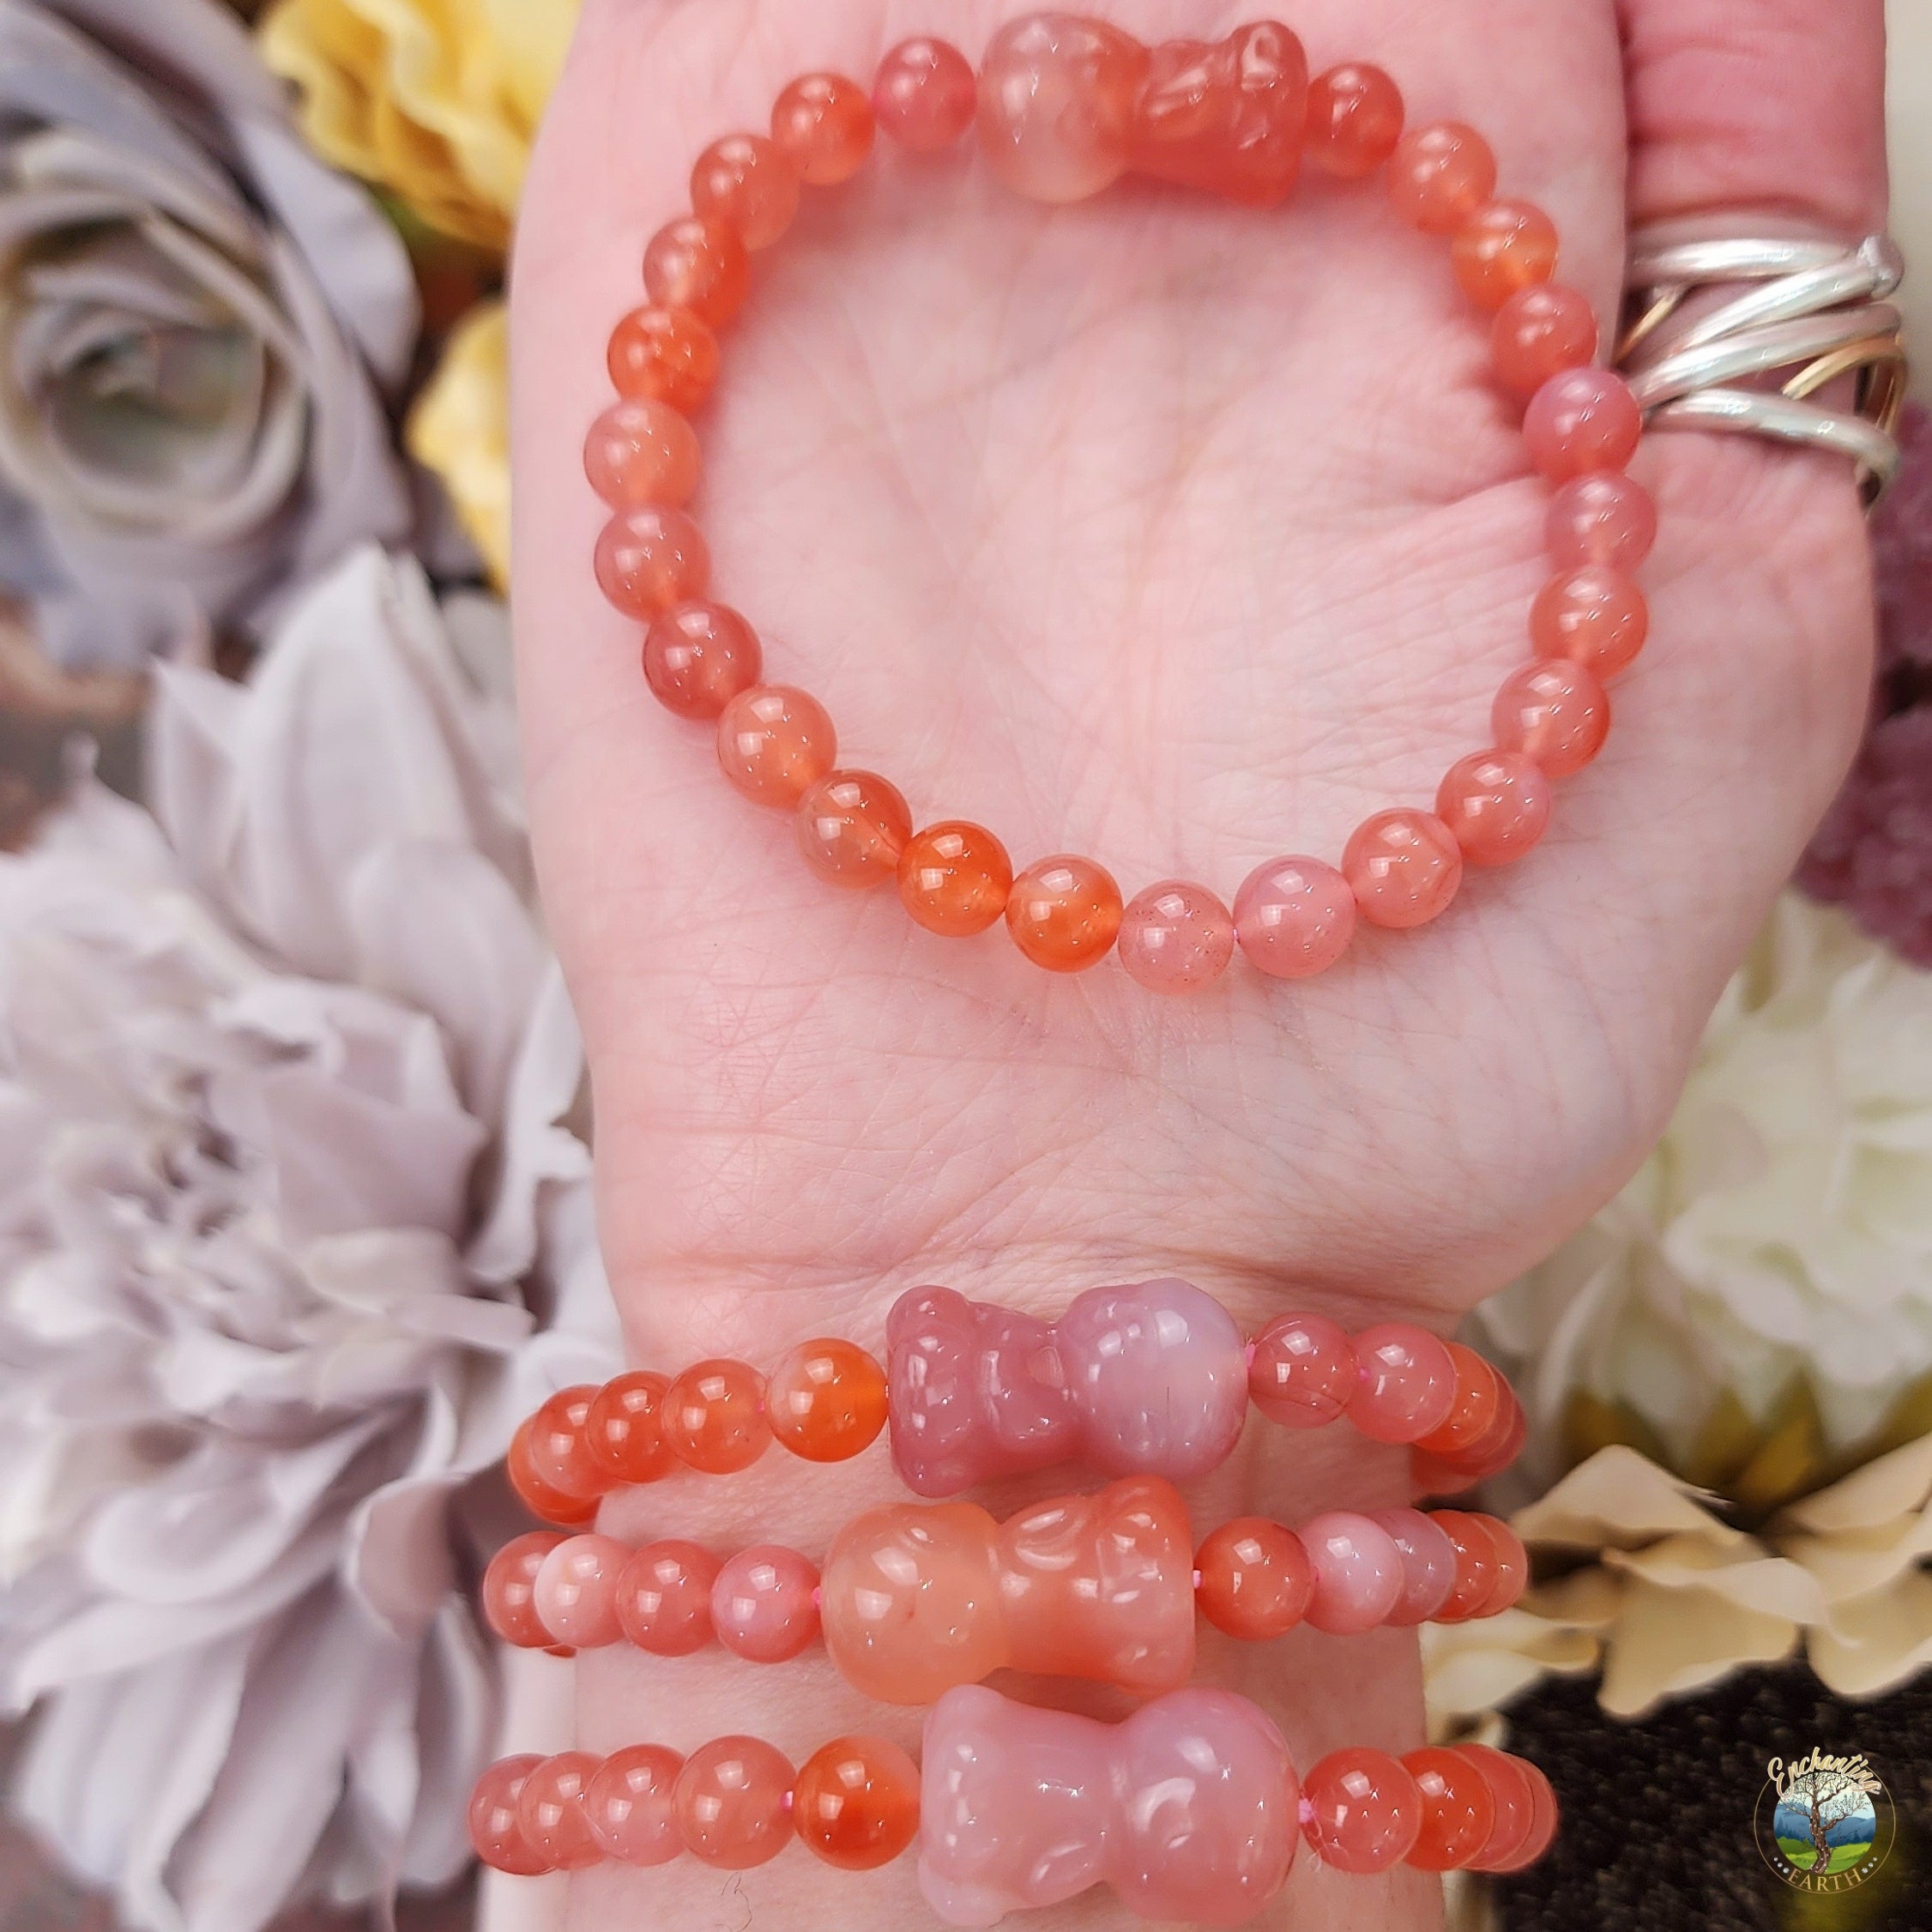 Yanyuan Agate Baby Buddha Bracelet for Achieving Goals, Confidence and Health